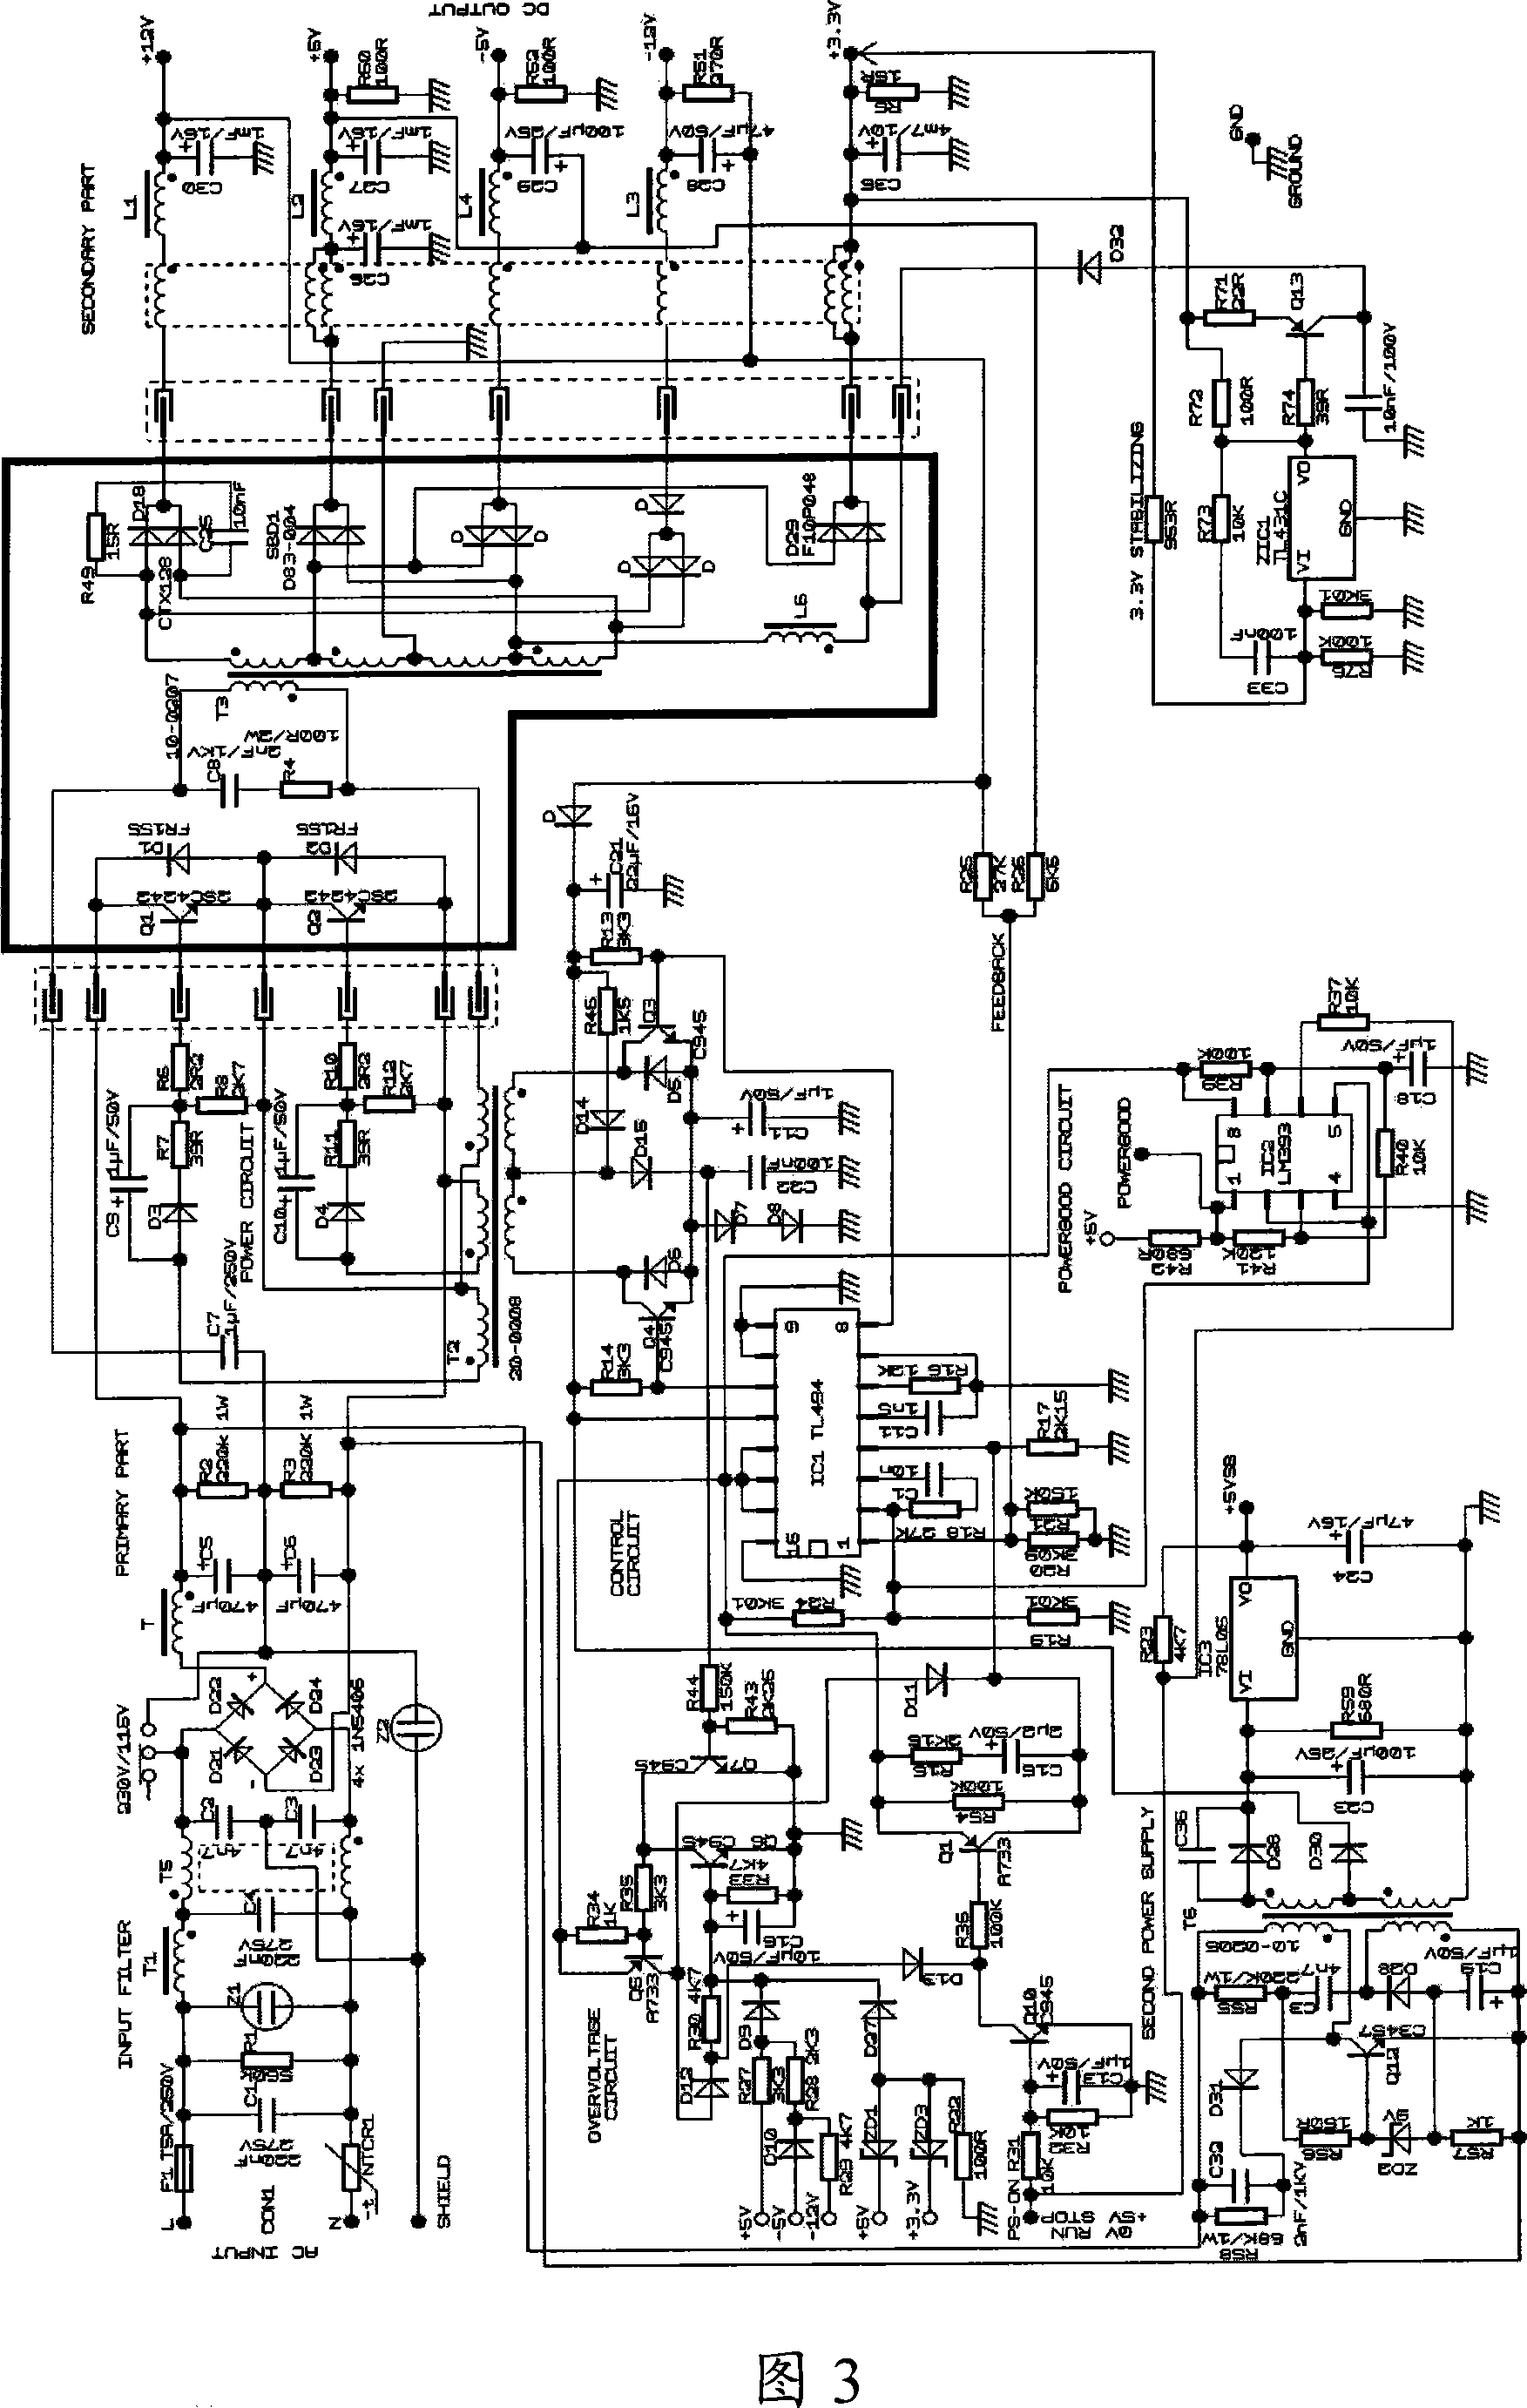 Computer electric source